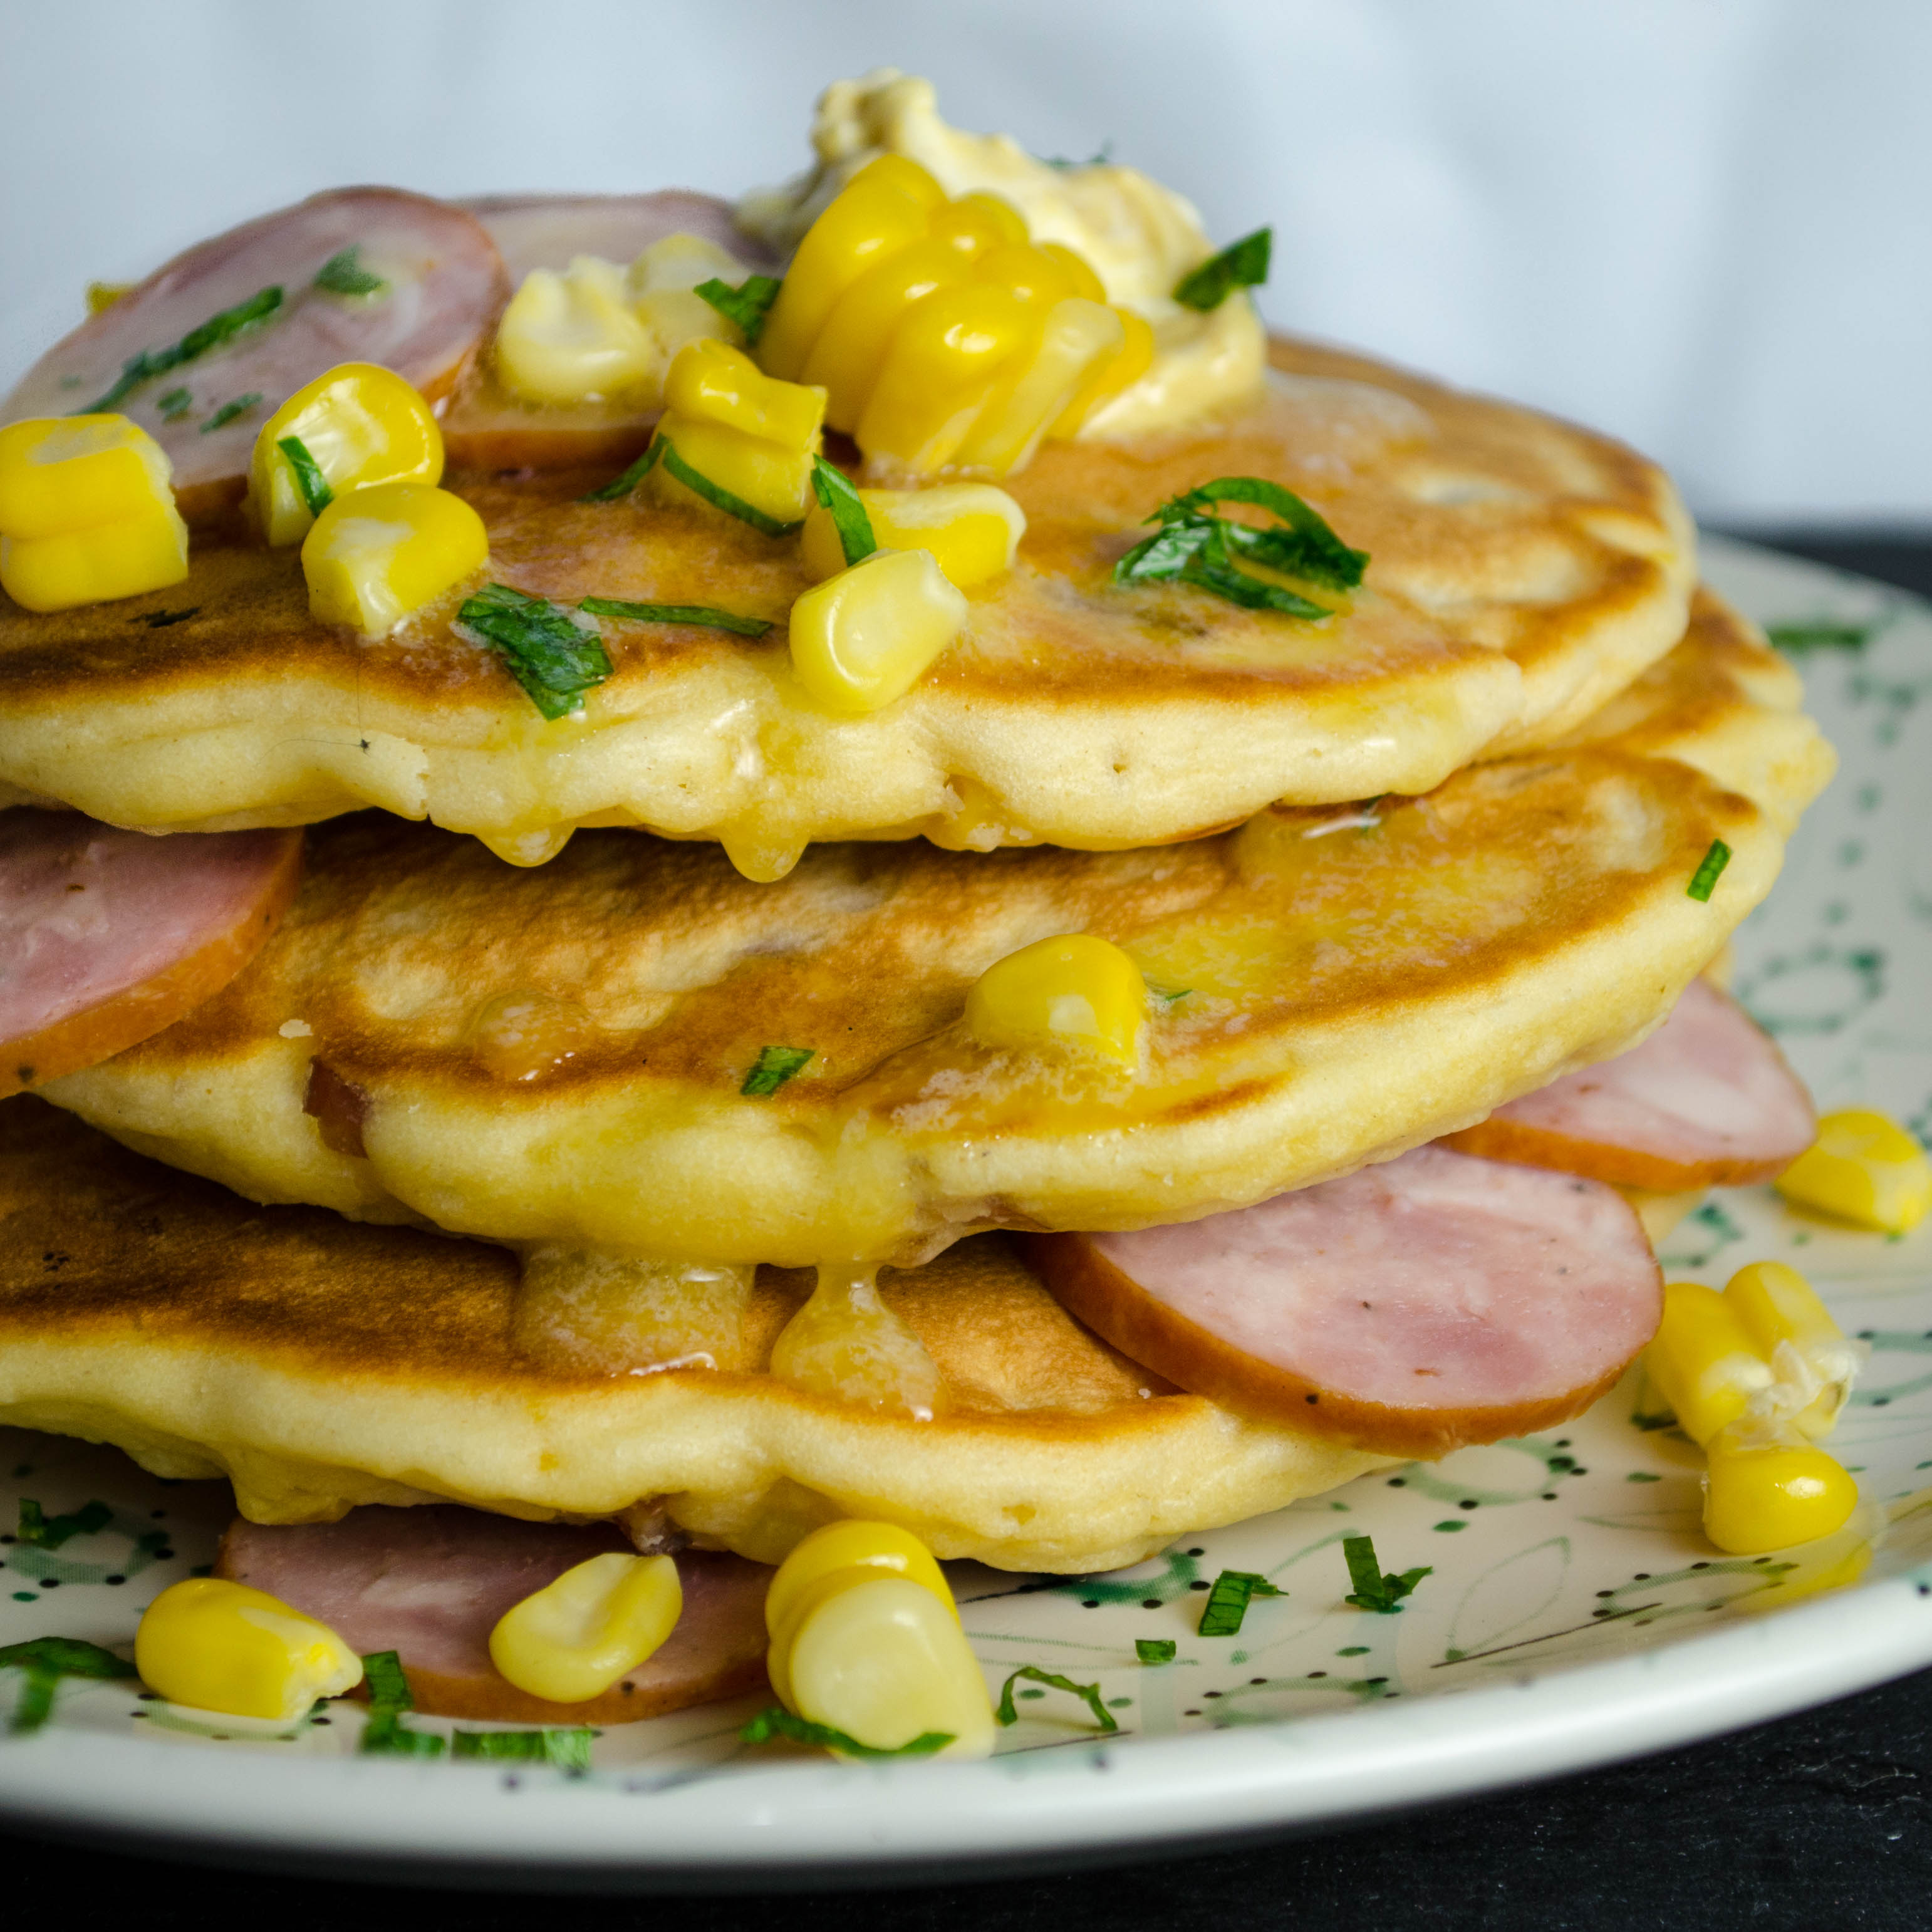 Savory pancakes with corn and kielbasa on floral patterned plate